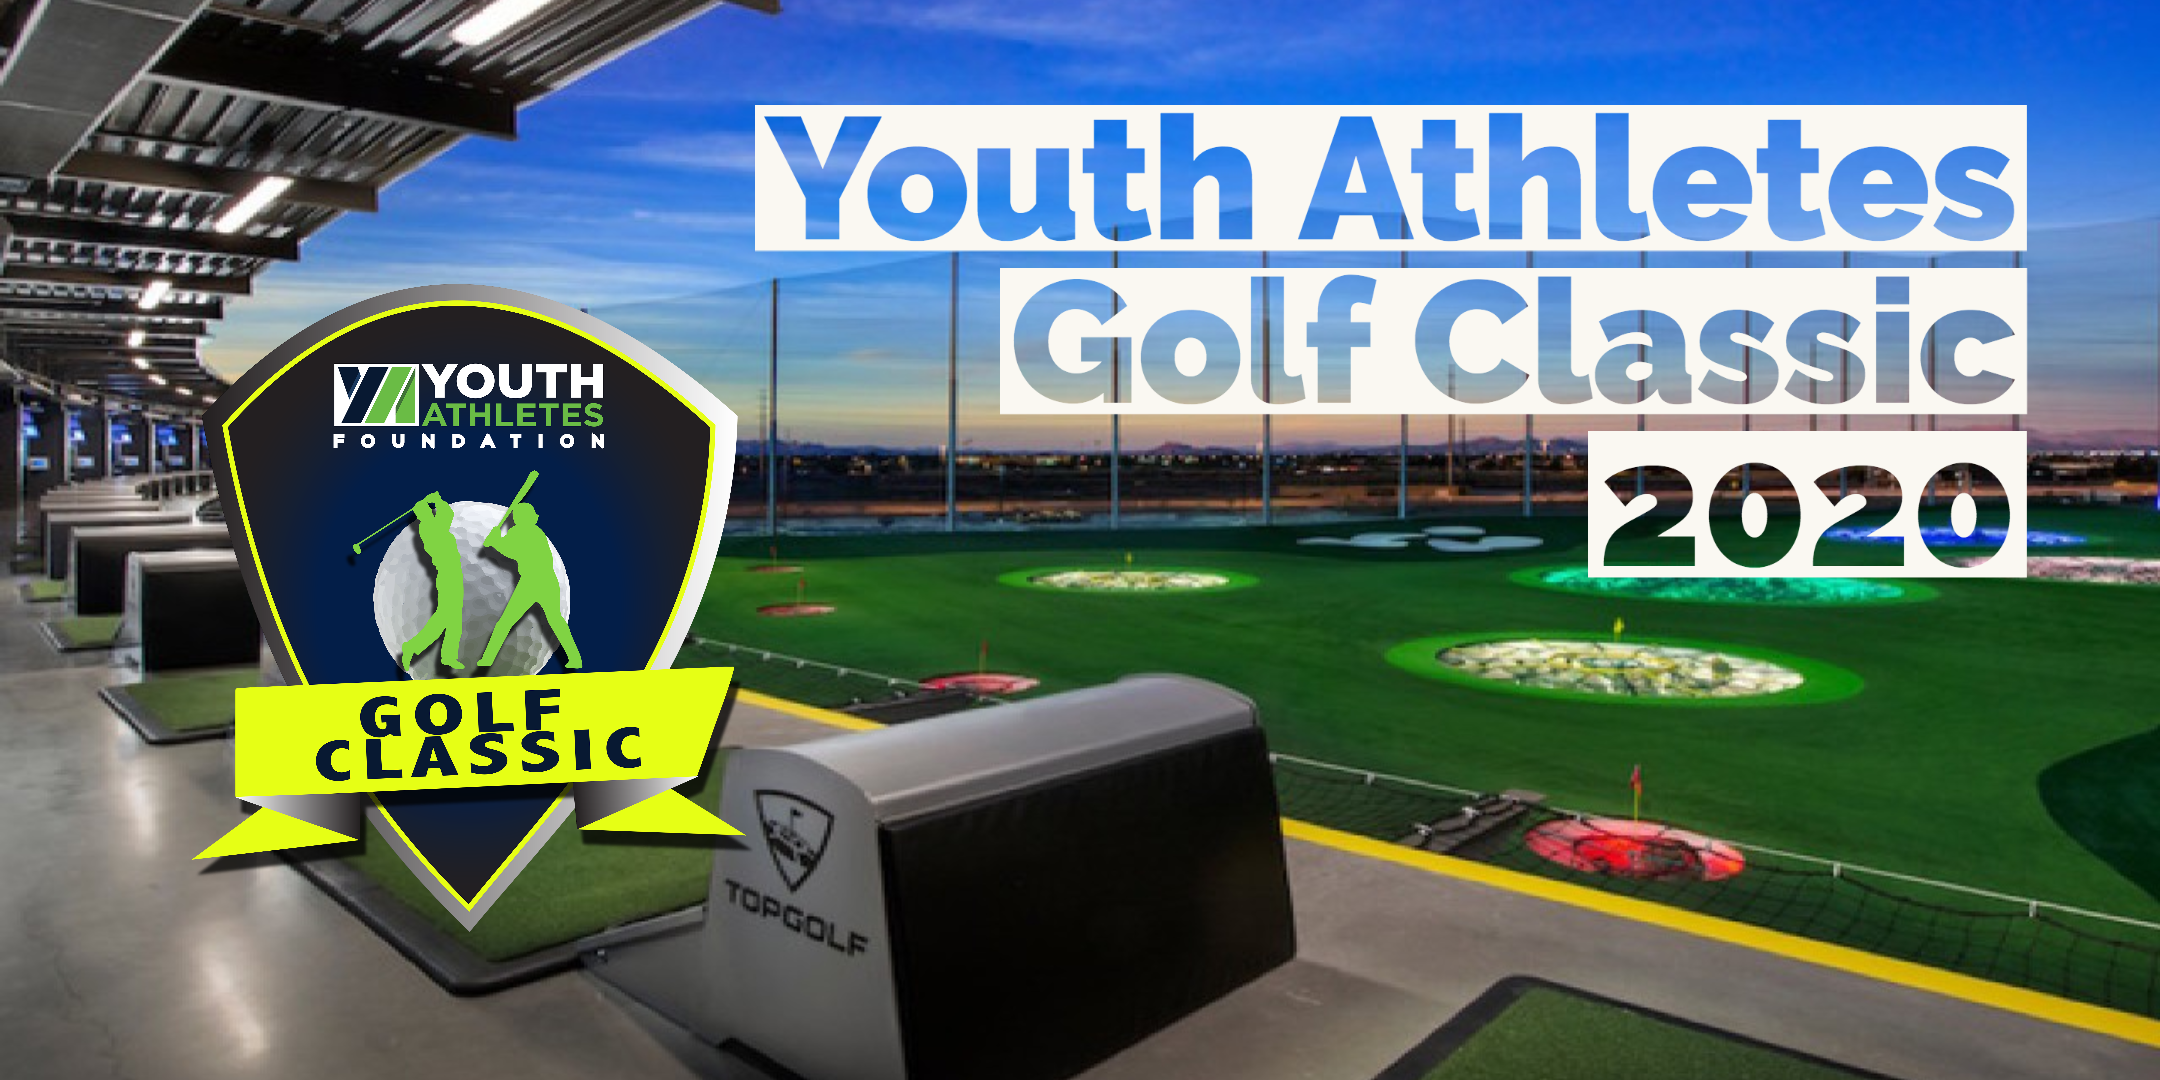 2020 Youth Athletes Golf Classic @ TopGolf!